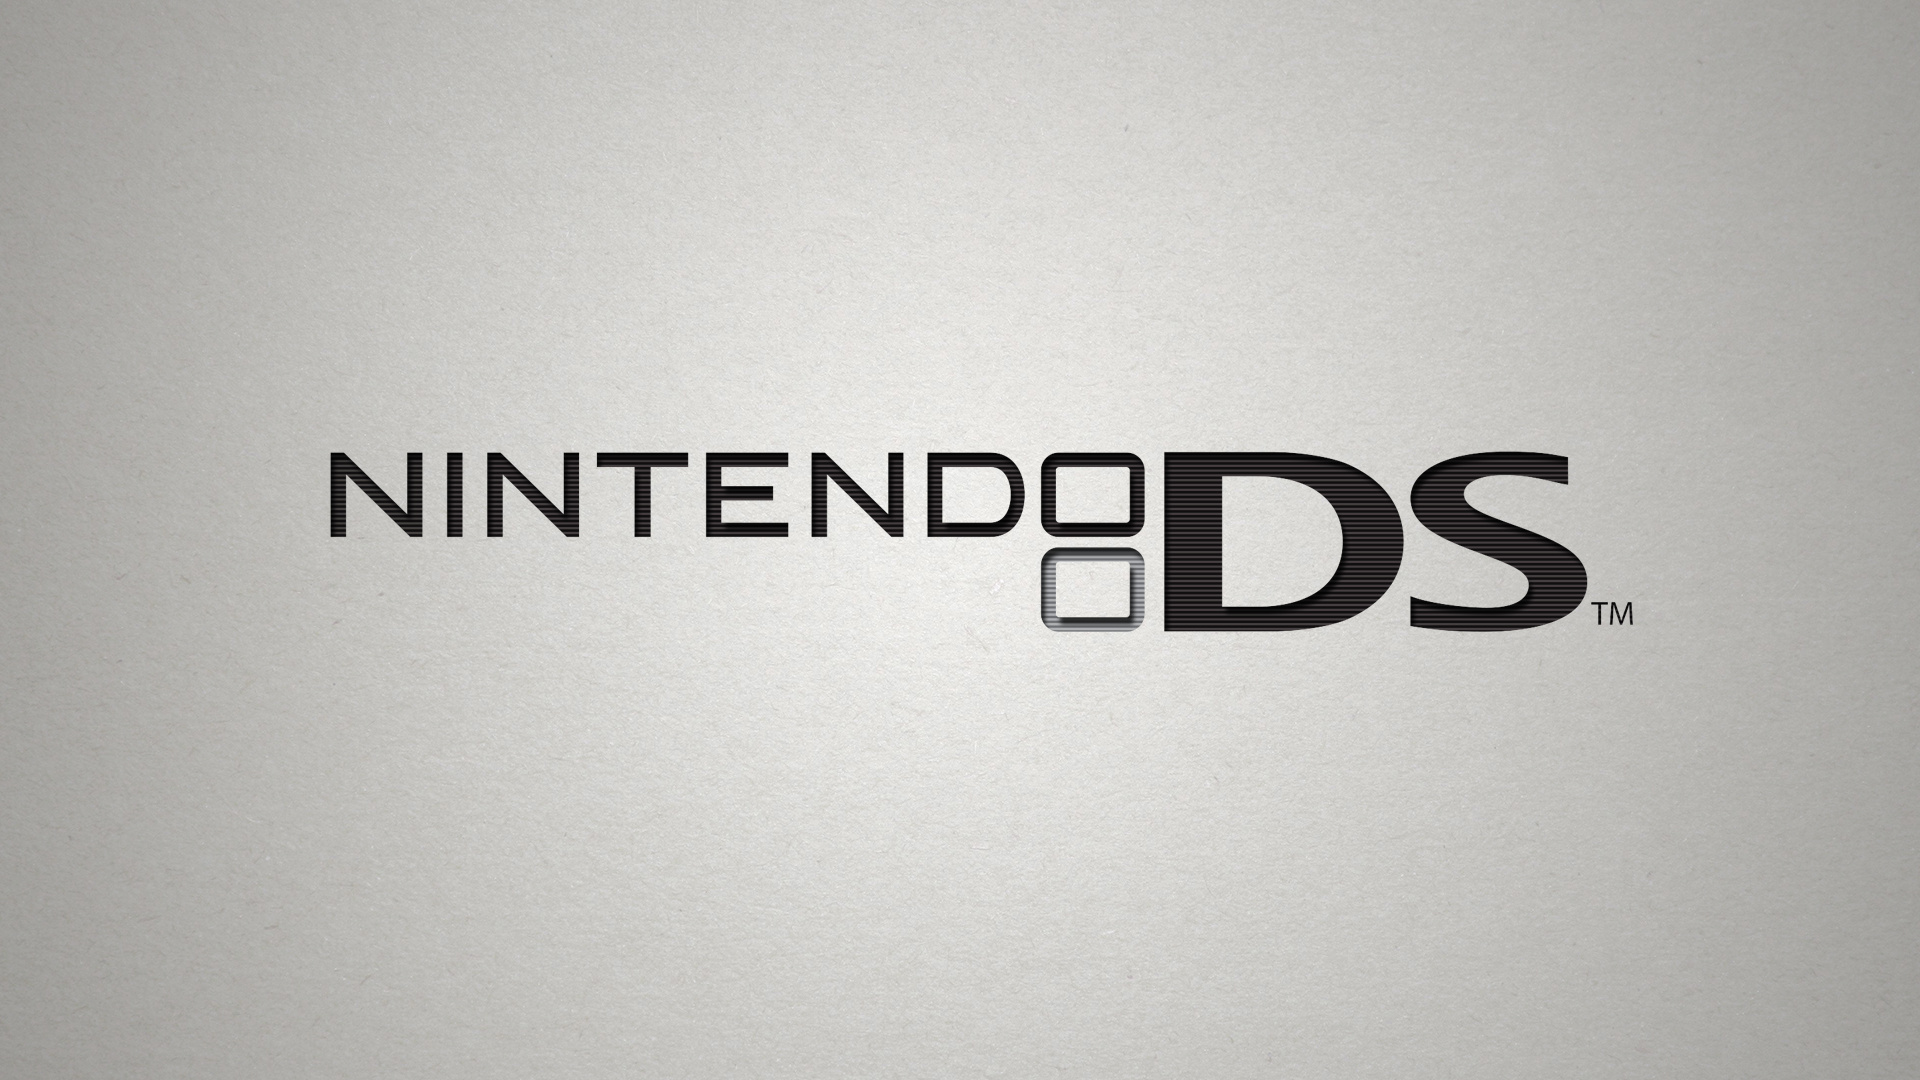 Nintendo: DS, A handheld game console, Two LCD screens working in tandem. 1920x1080 Full HD Wallpaper.